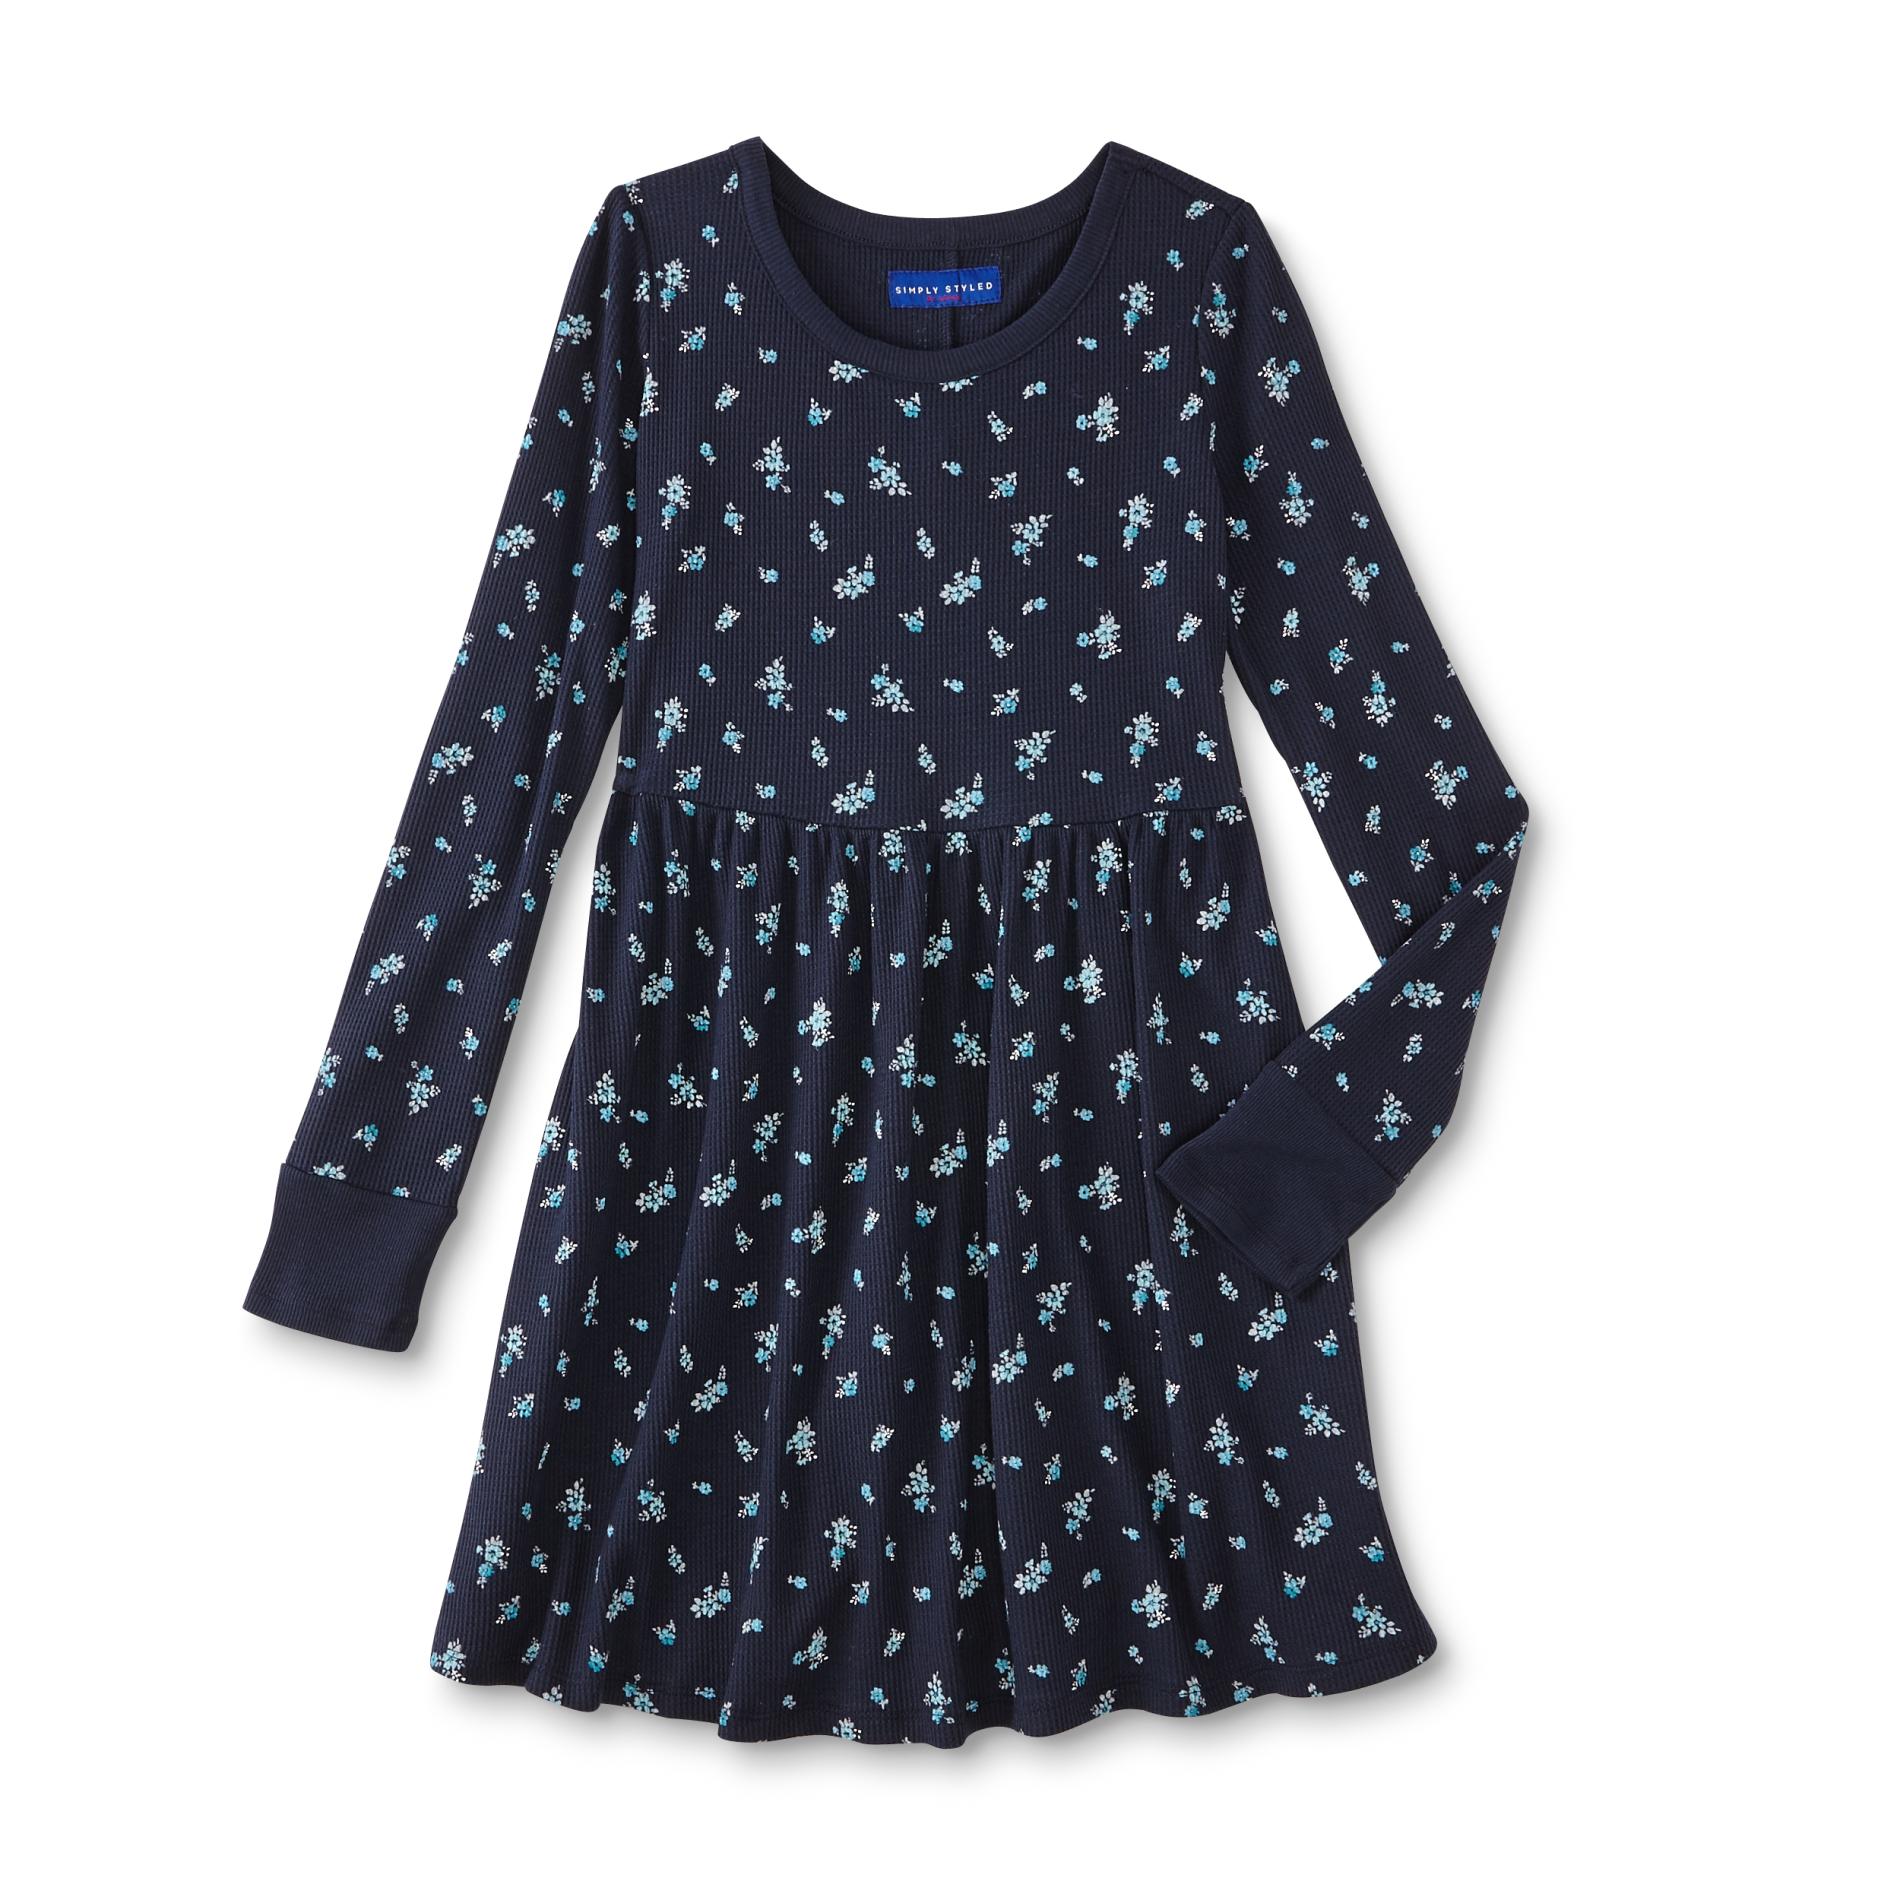 Simply Styled Girl's Thermal Long-Sleeve Dress - Floral